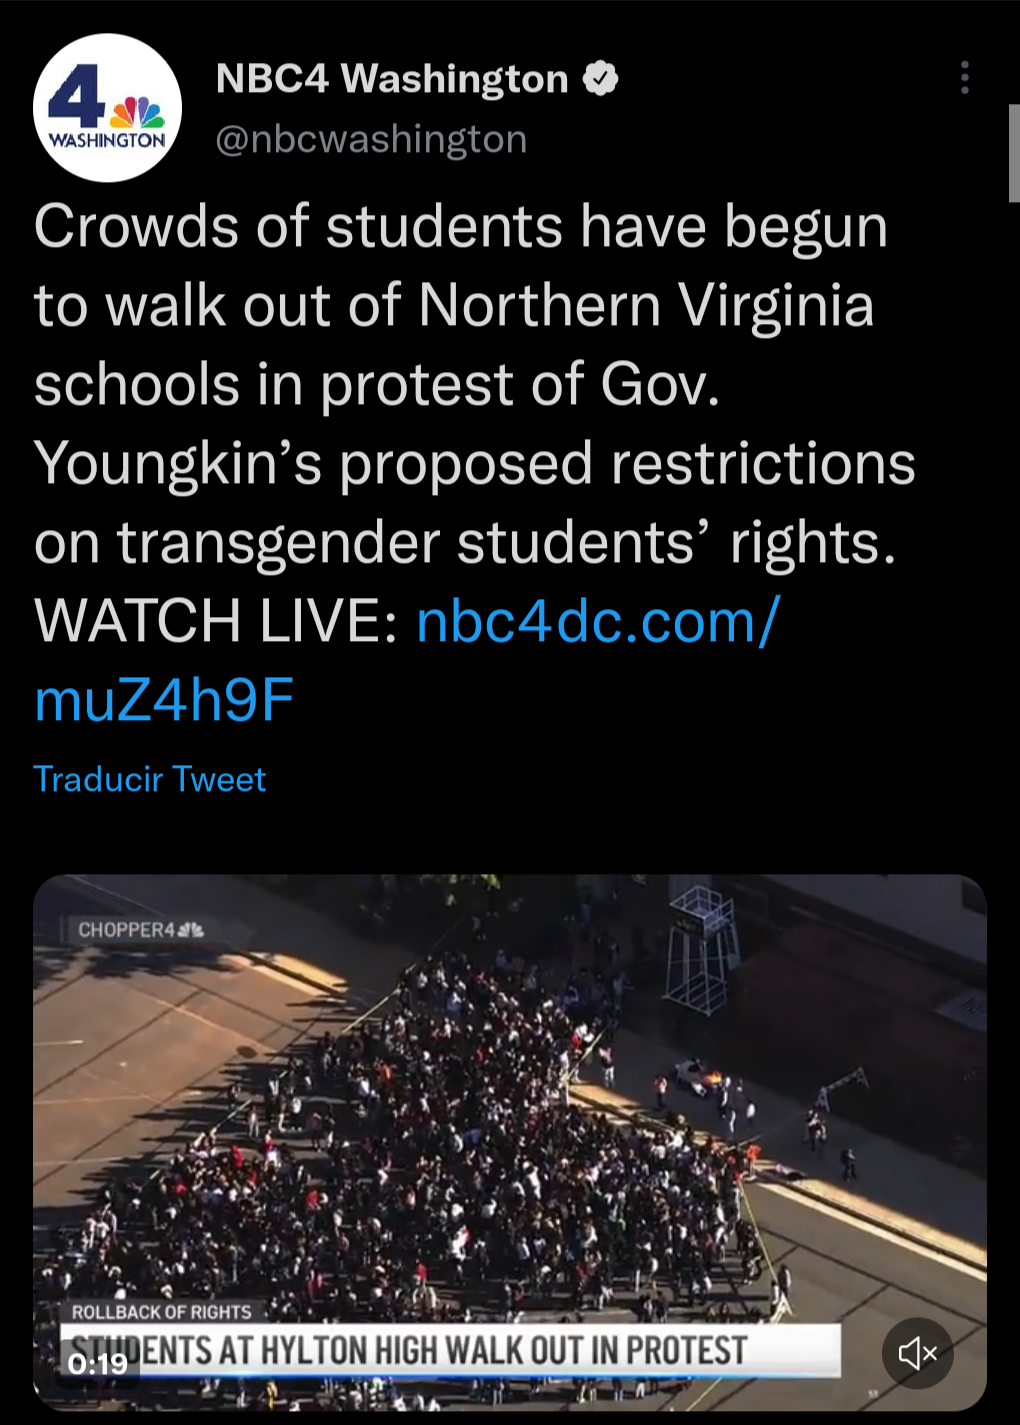 tweet from an NBC4 account reading "Crowds of students have begun to walk out of Northern Virginia schools in protest of Gov. Youngkin’s proposed restrictions on transgender students’ rights." with photo of hundreds of children protesting